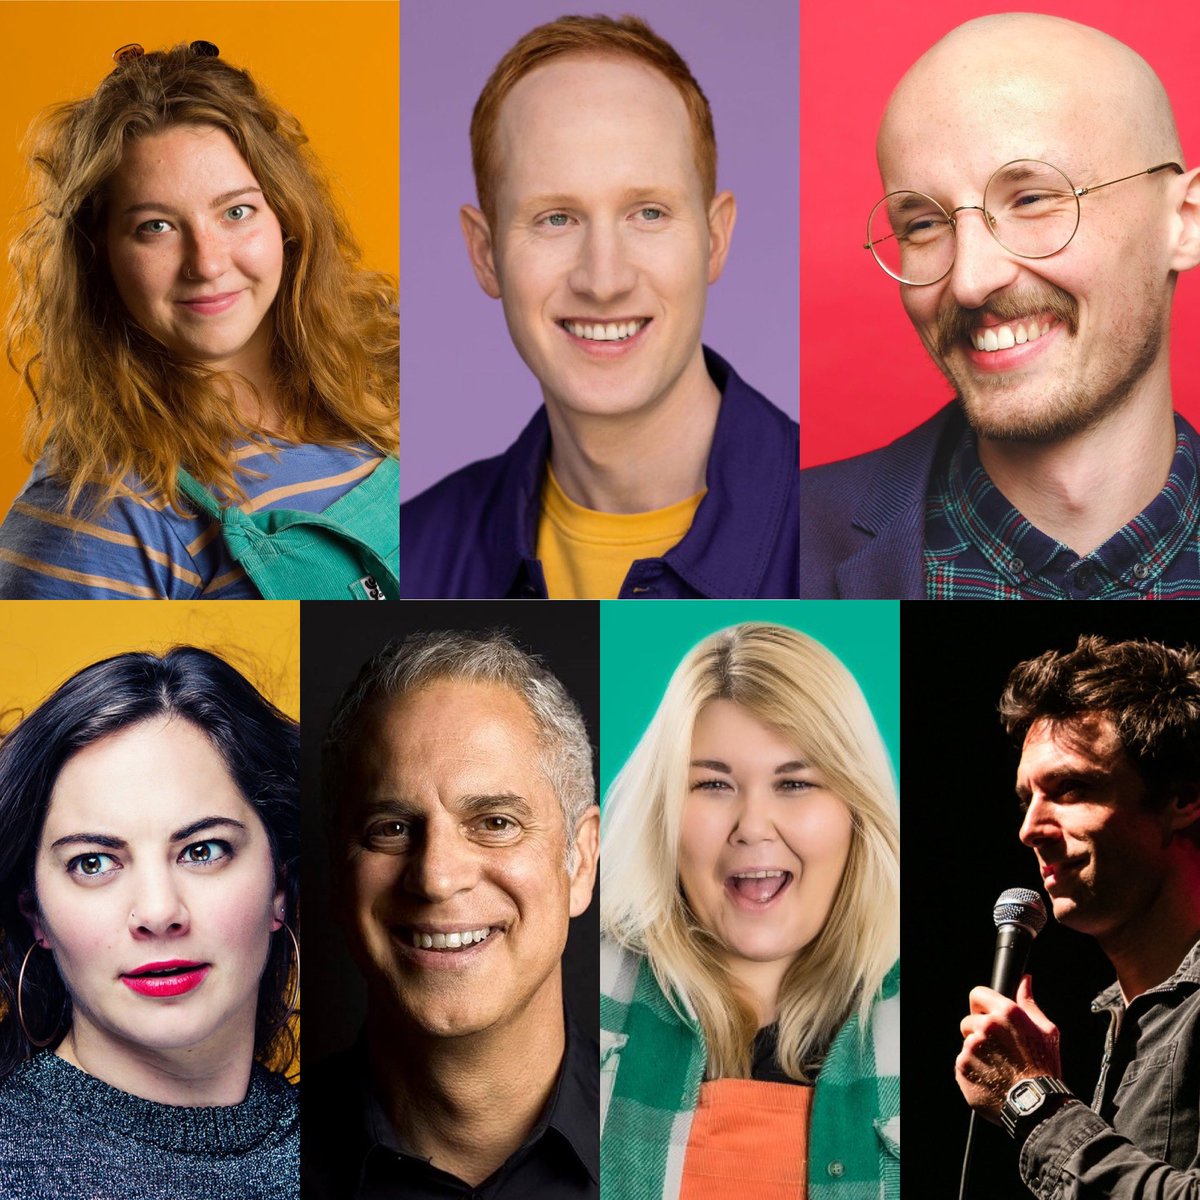 ✨HUMP TOMORROW✨ 🐪 Wed 3 April 🐪 🎟️ FREE TICKETS 🙀🎟️ 🌟@hannahbycz 🌟@jessienixoncmdy 🌟@irresponsabelle 🌟Chris Cray 🌟@andyfieldhello 🌟Mike Capozzola 🌟@ClintJEdwards Doors 7pm | Show 8pm @Backyard_Comedy Reserve your FREE seats here 🎟️ 👉 bit.ly/ComedyHump